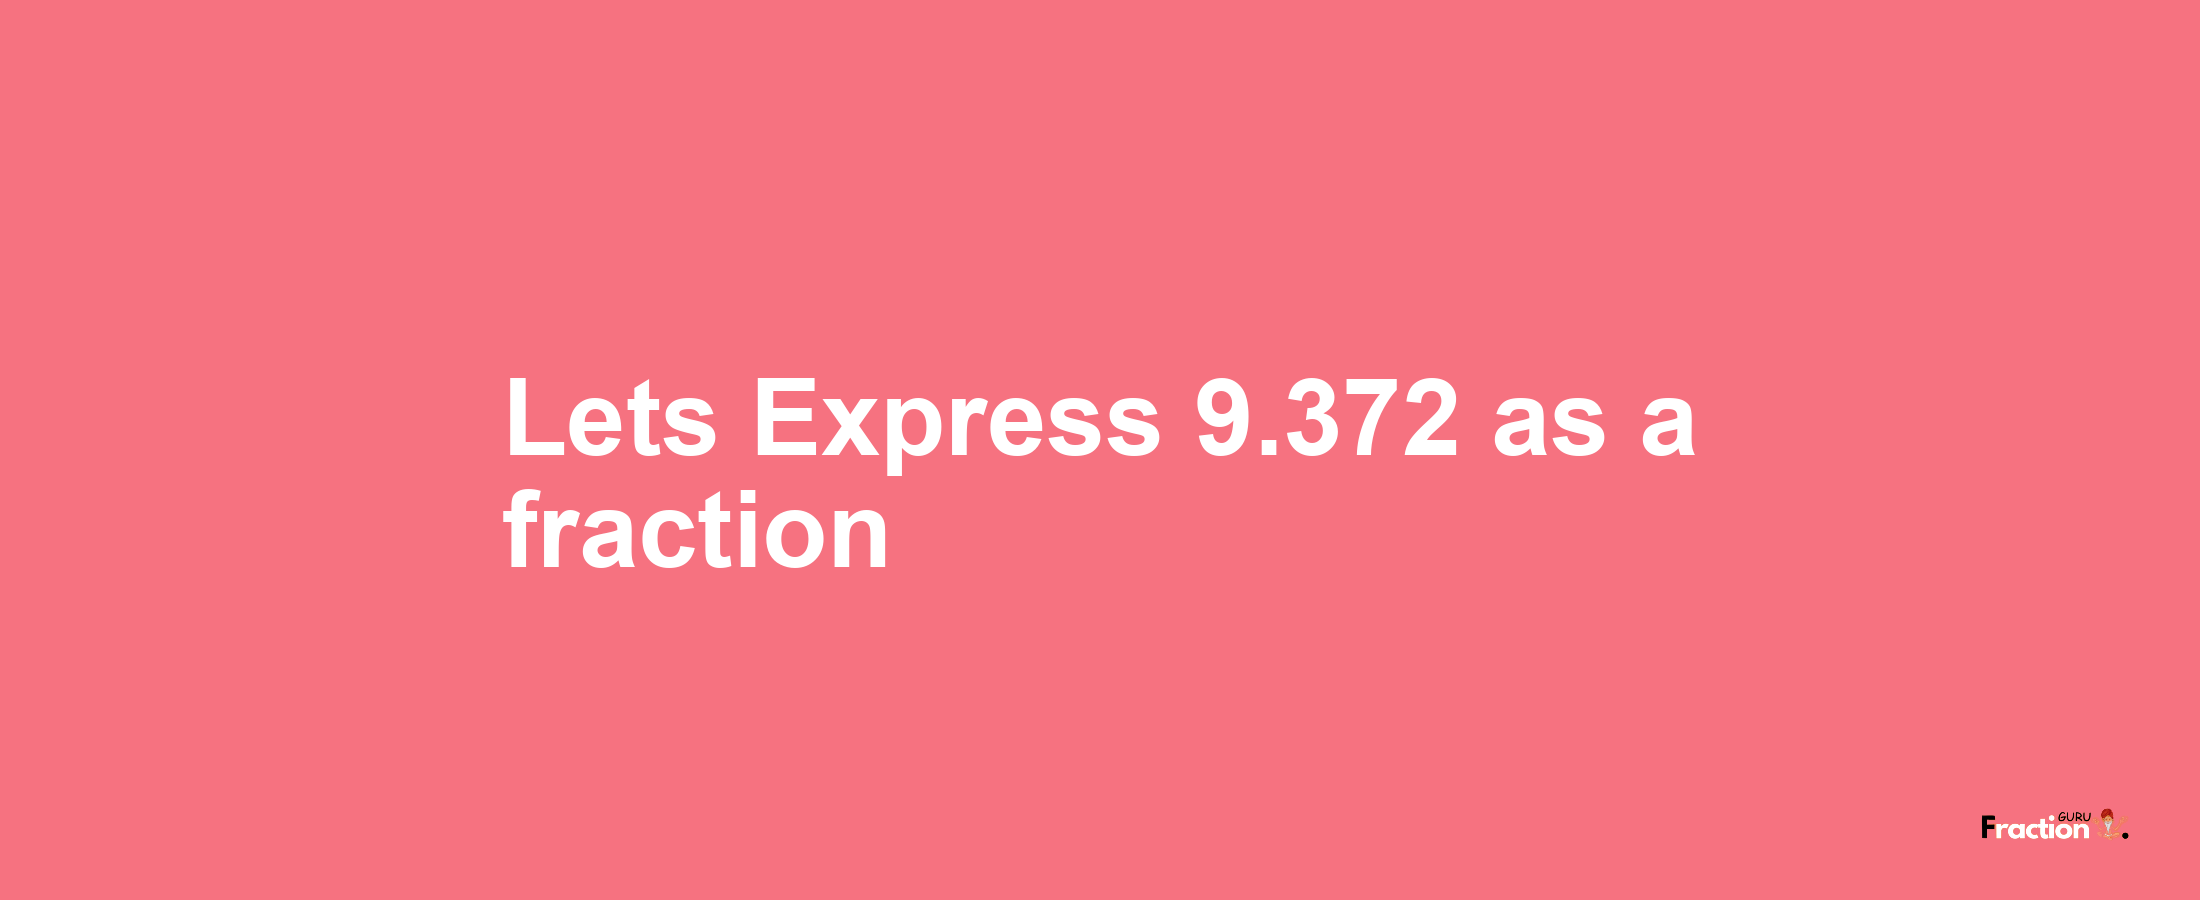 Lets Express 9.372 as afraction